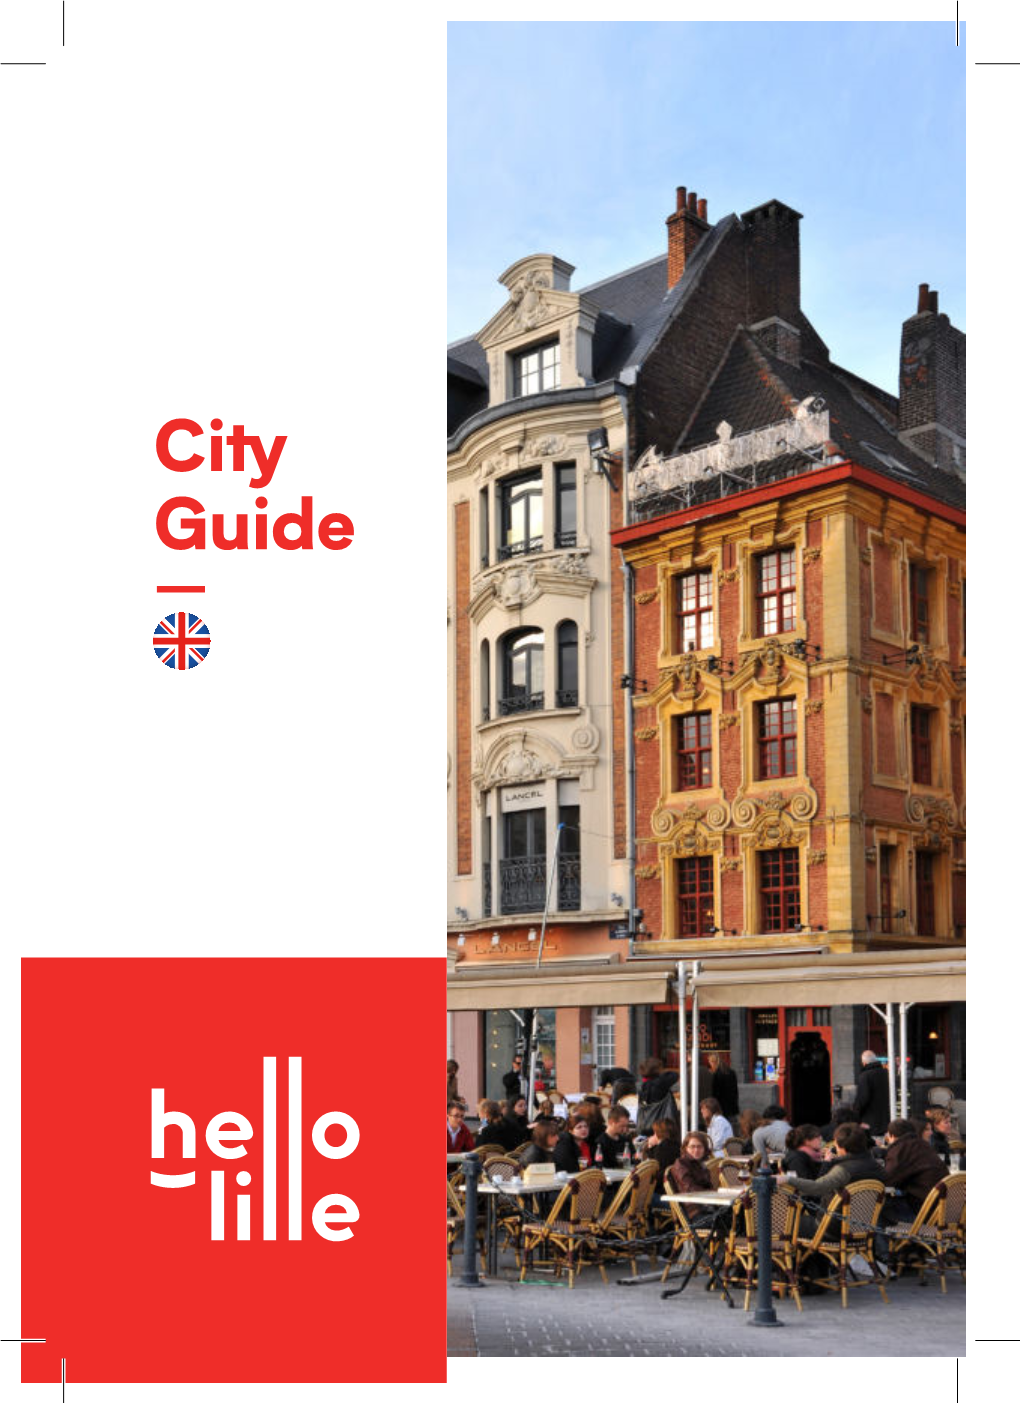 City Guide — Editorial —